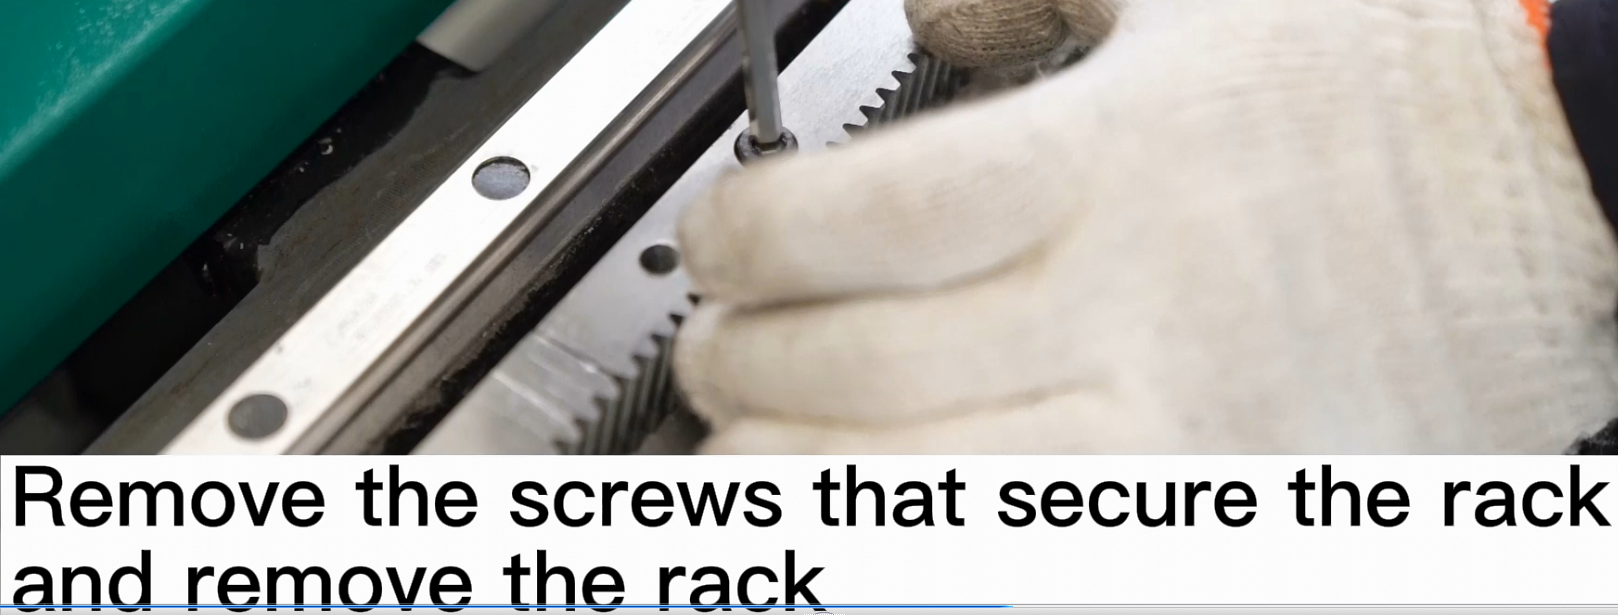 Rack removal.png